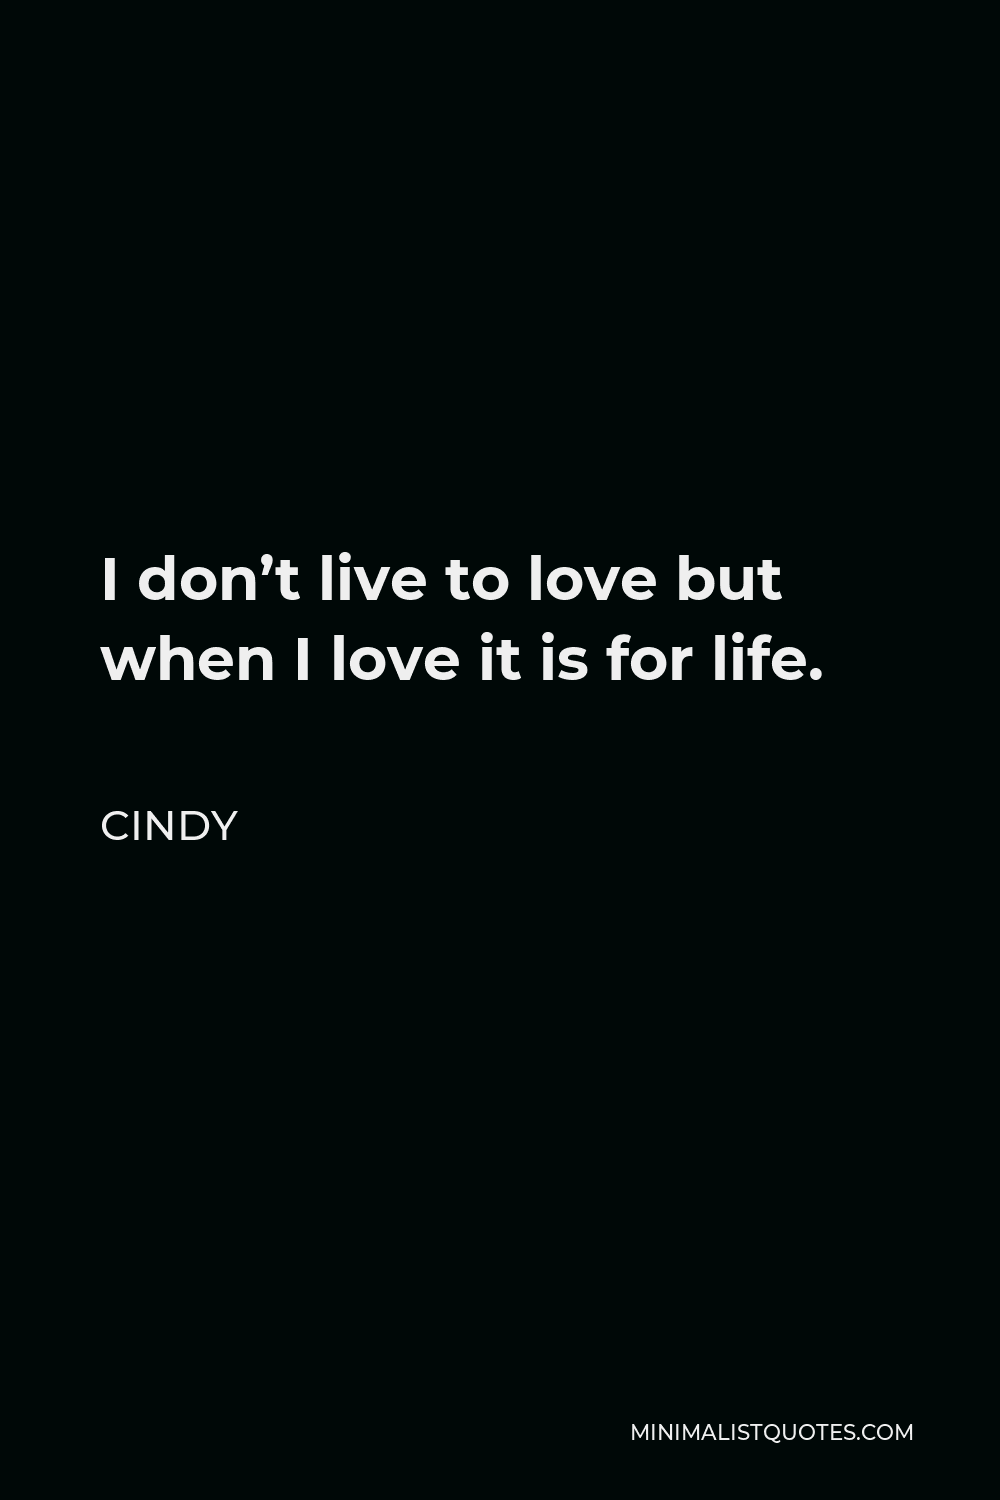 Cindy Quote - I don’t live to love but when I love it is for life.